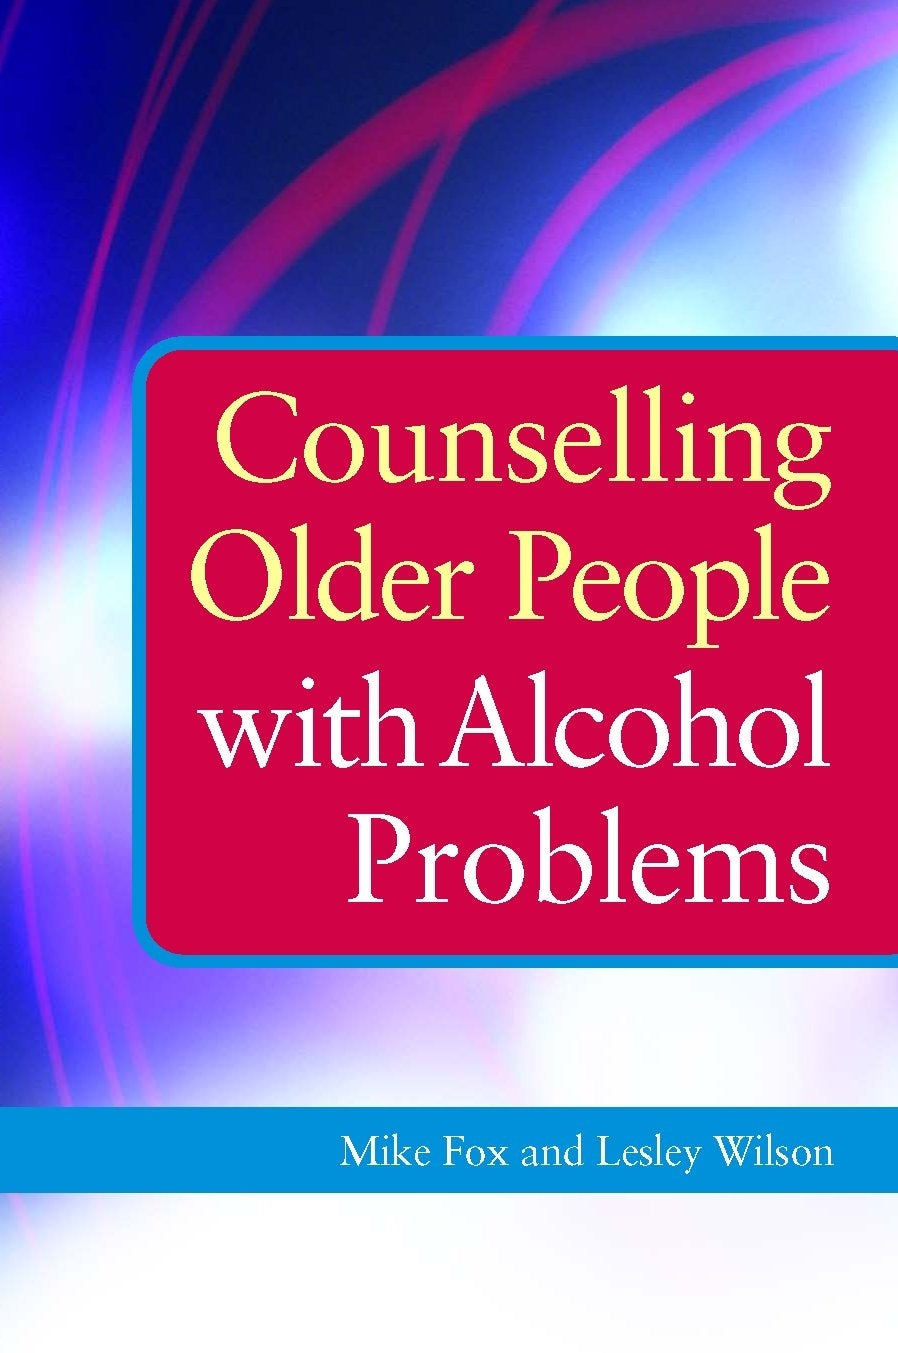 Counselling Older People with Alcohol Problems by Lesley Wilson, Michael Fox